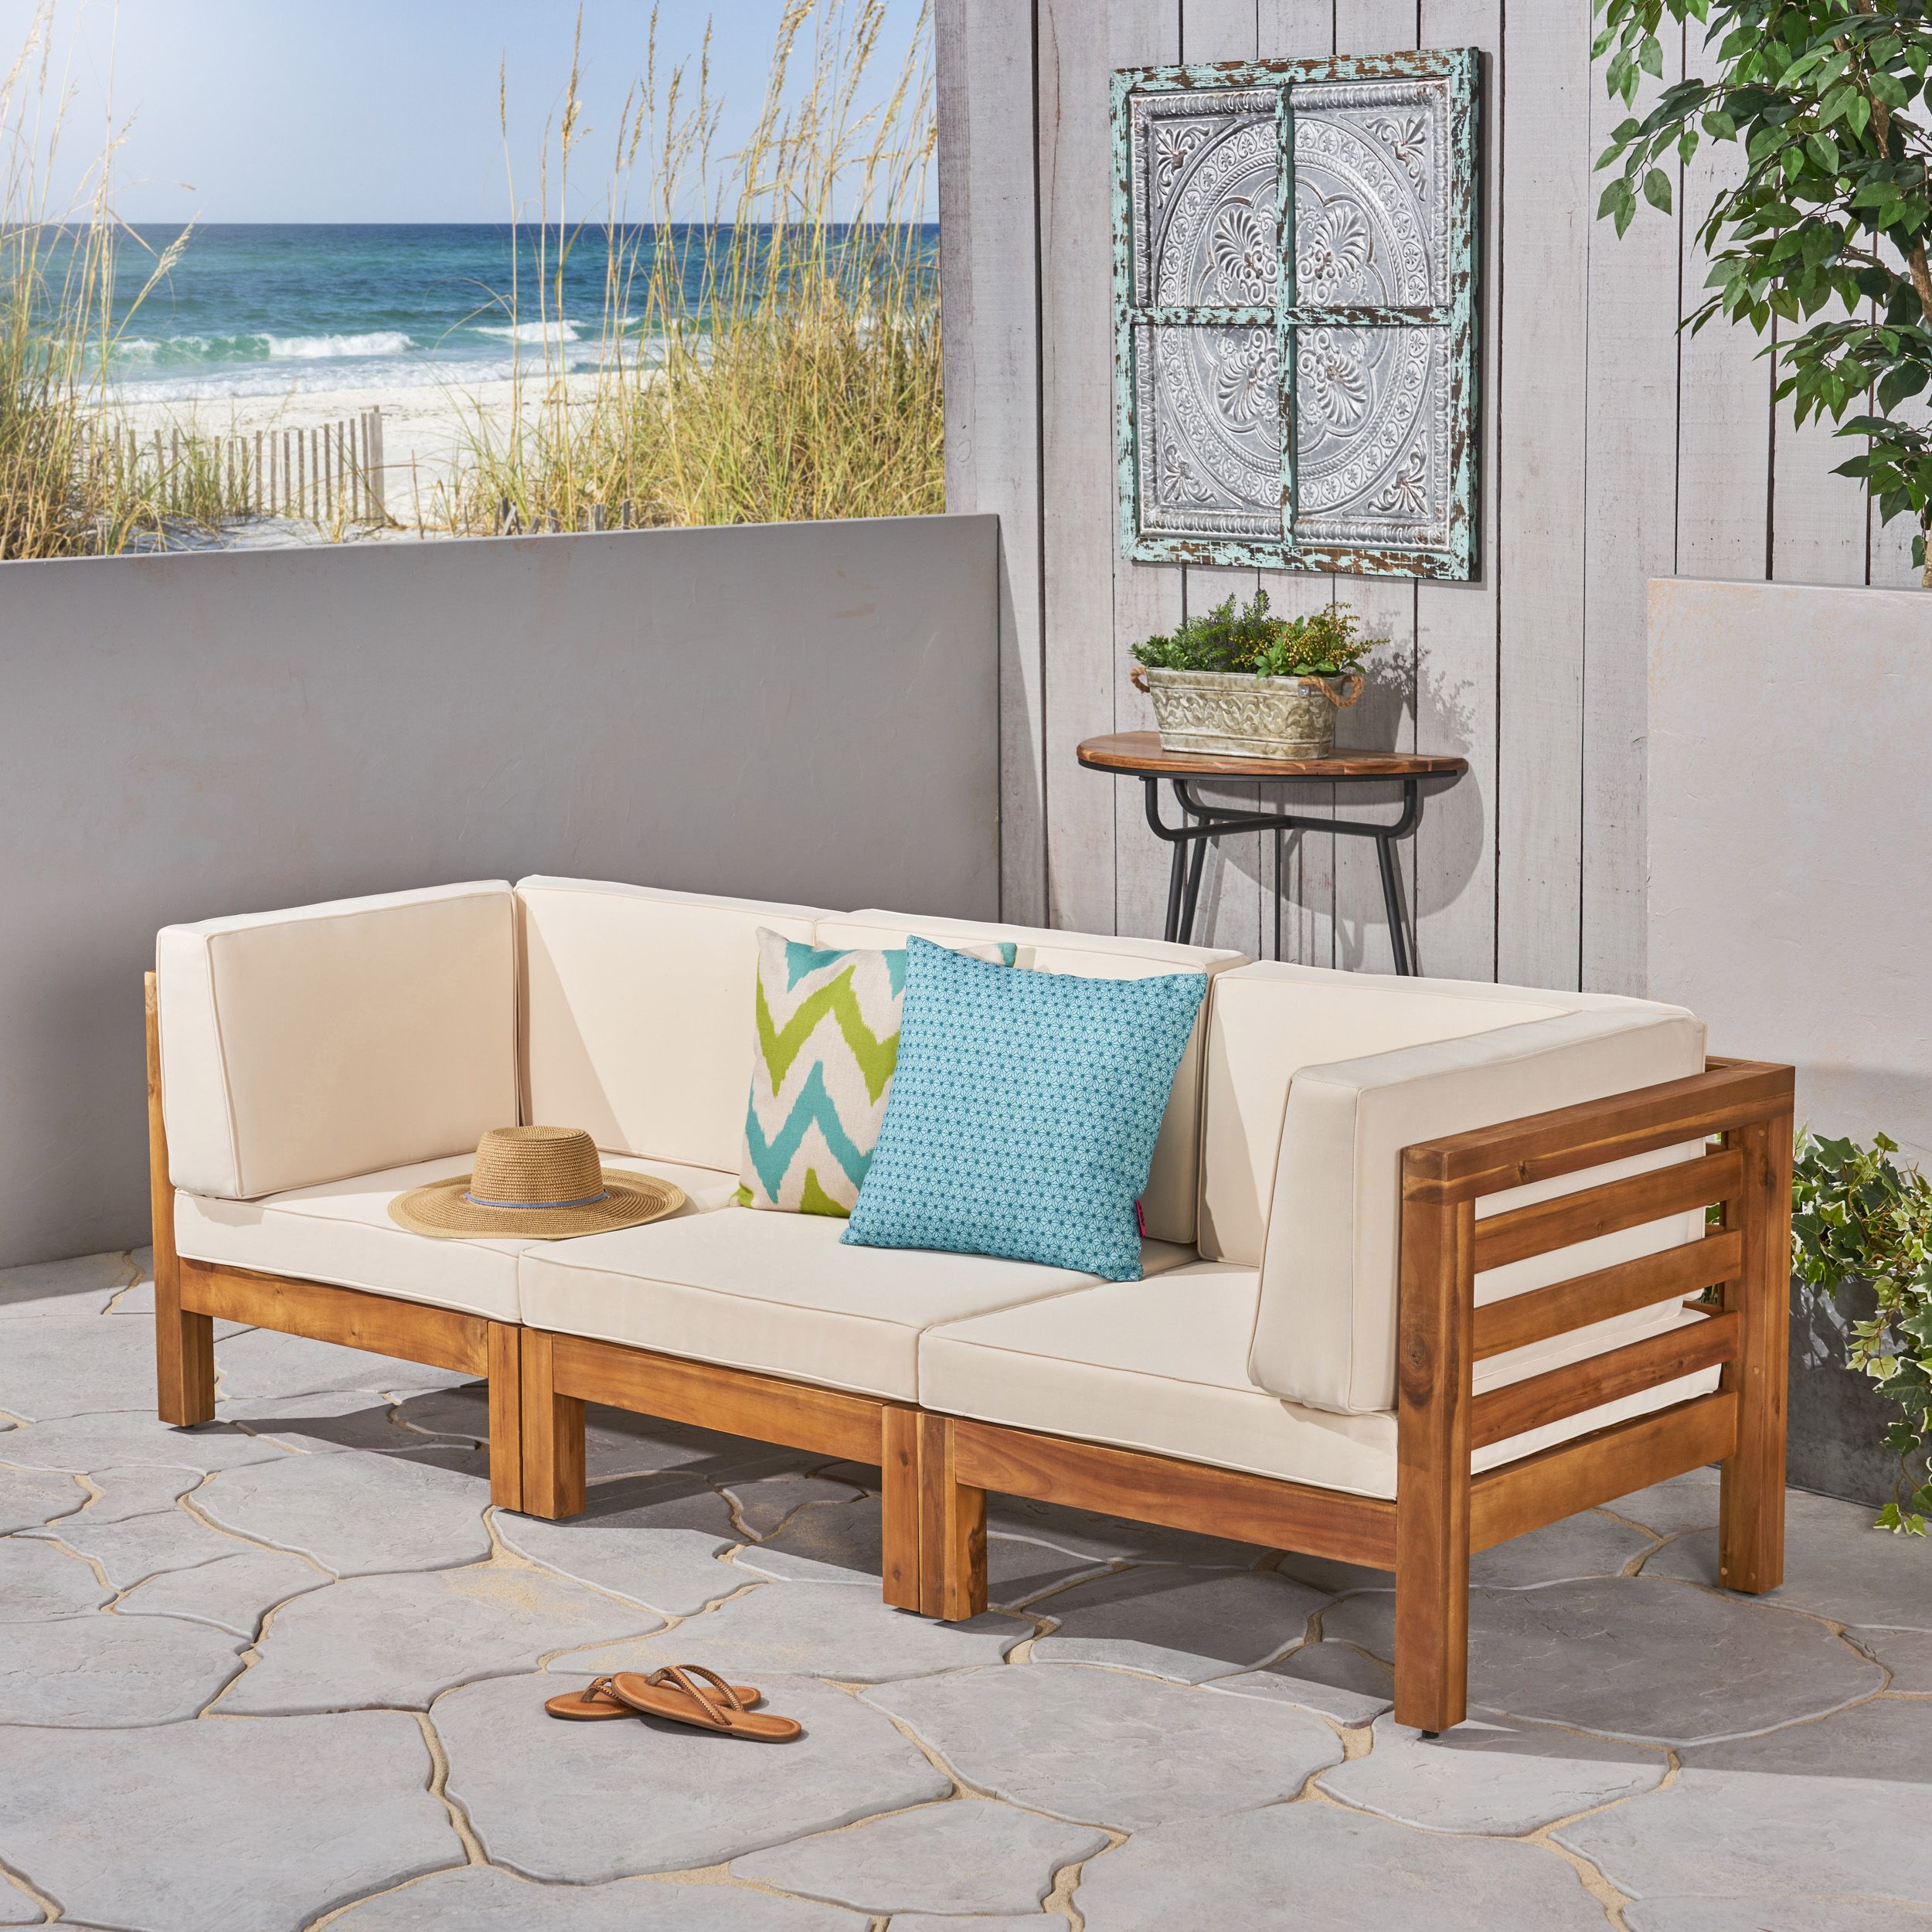 Frankie Outdoor Acacia Wood Sectional Sofa With Cushions Throughout Ecru And Otter Console Tables (View 20 of 20)